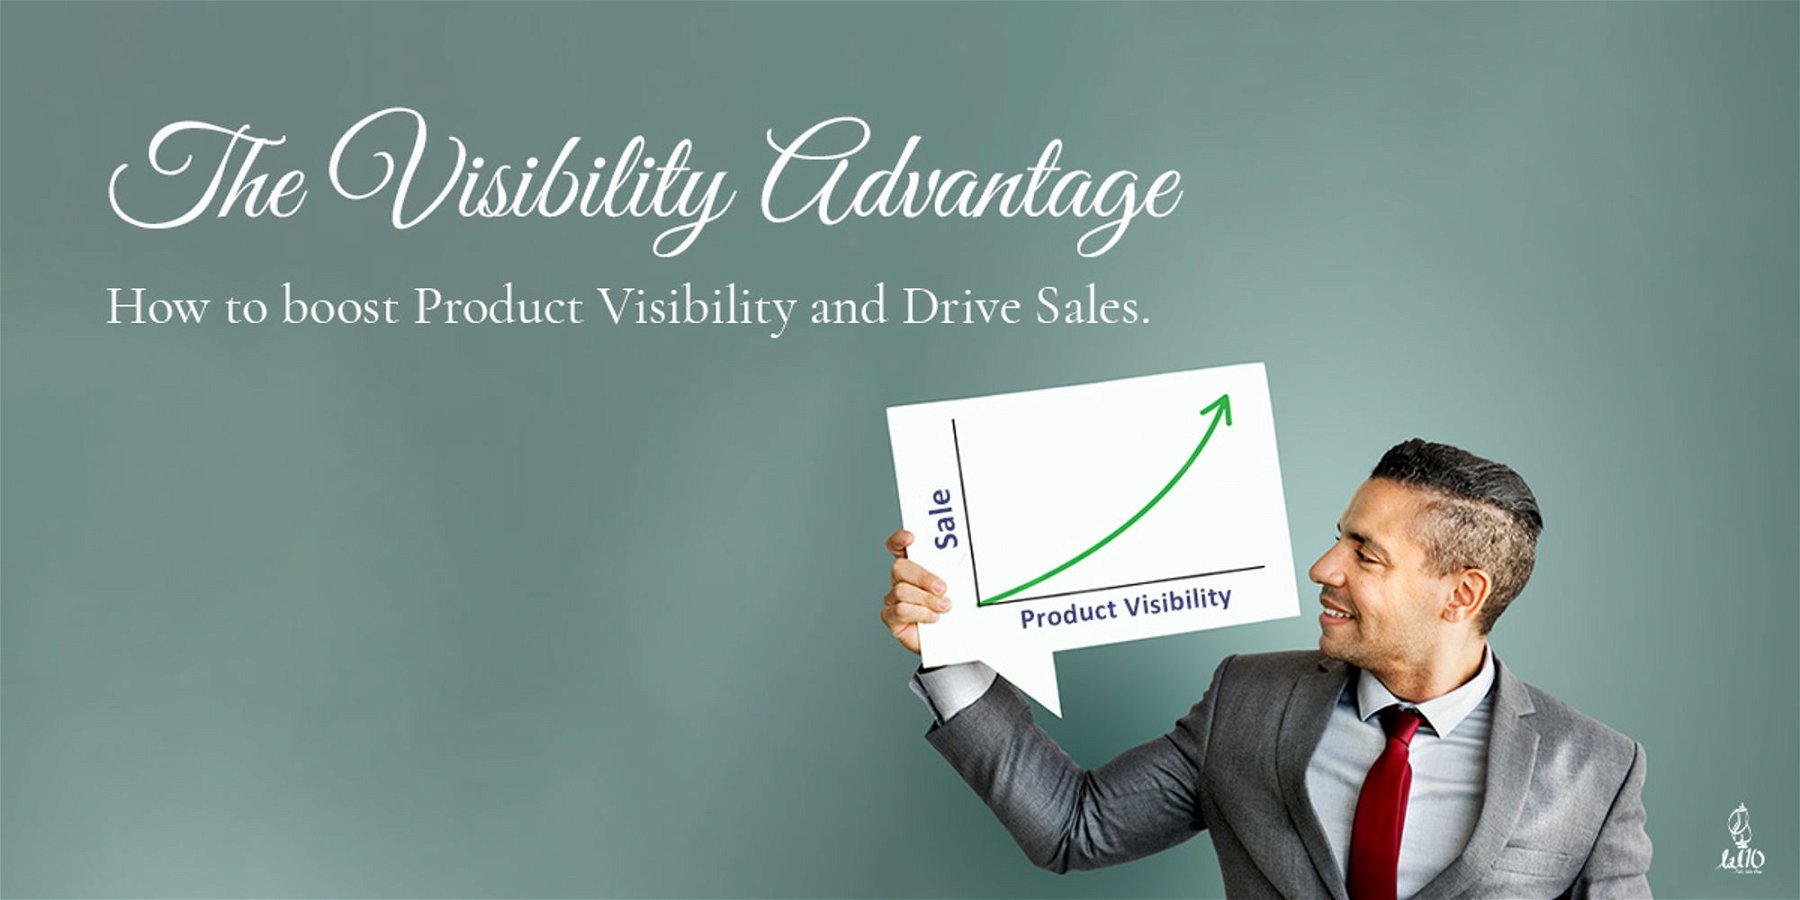 AV TRE

How to boost Product Visibility and Drive Sales.